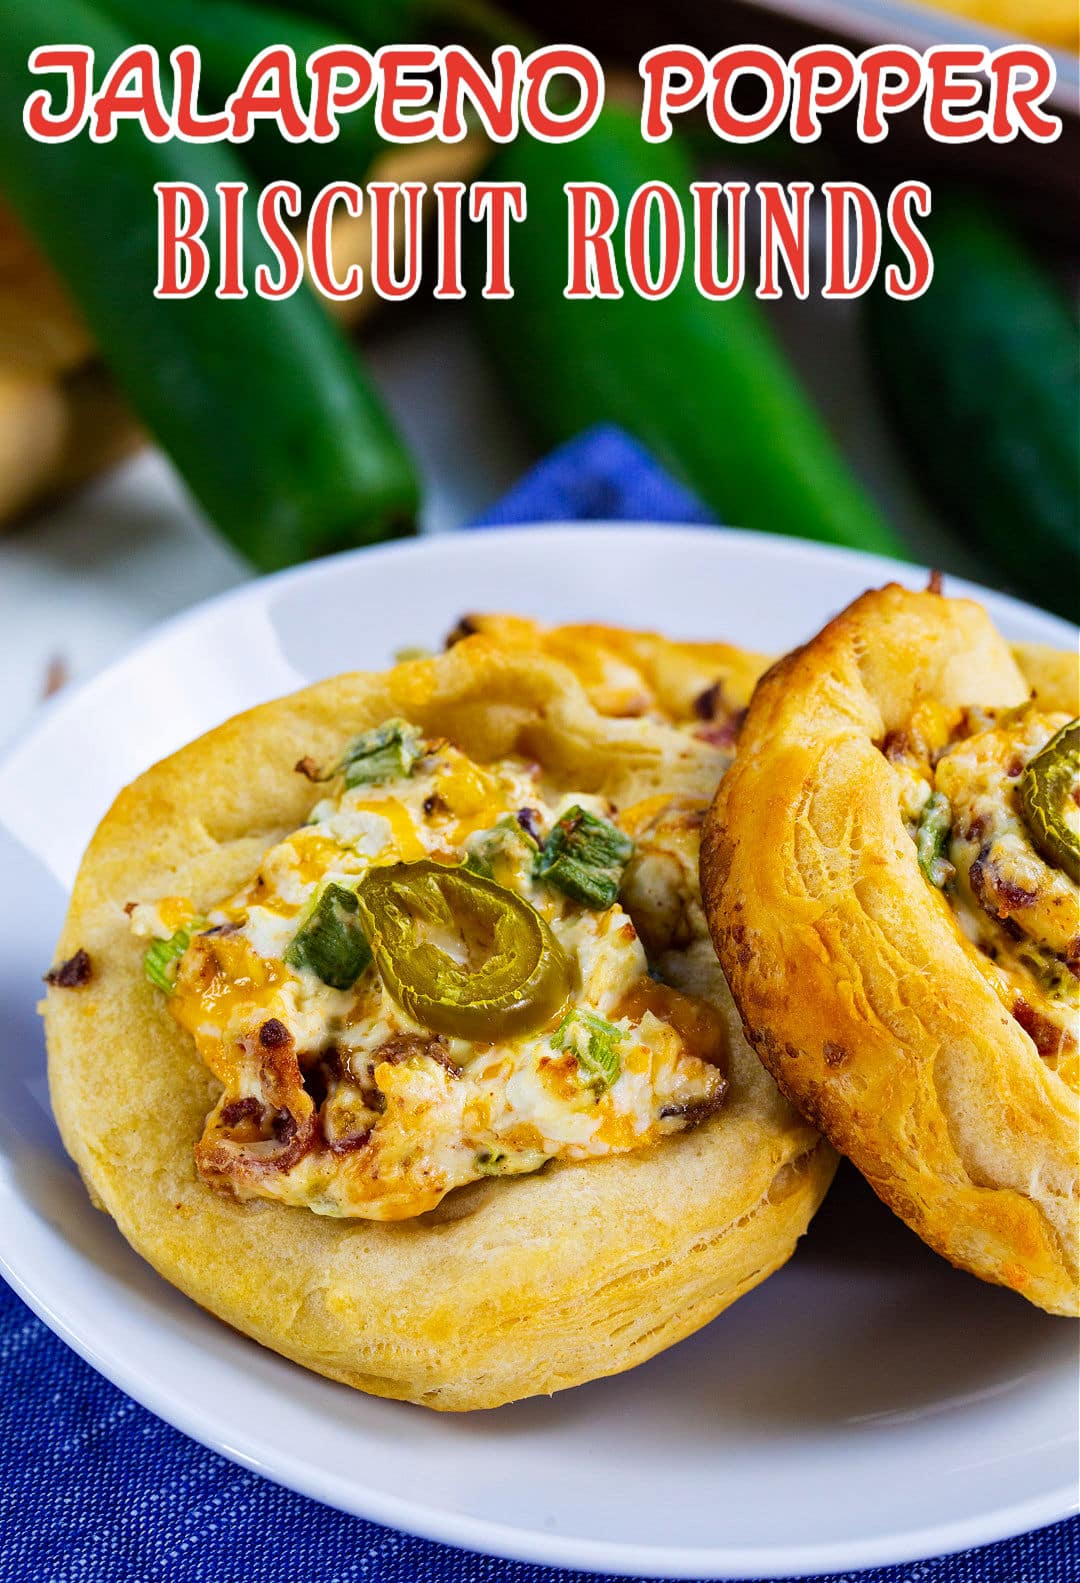 Jalapeno Popper Biscuit Rounds on a plate.